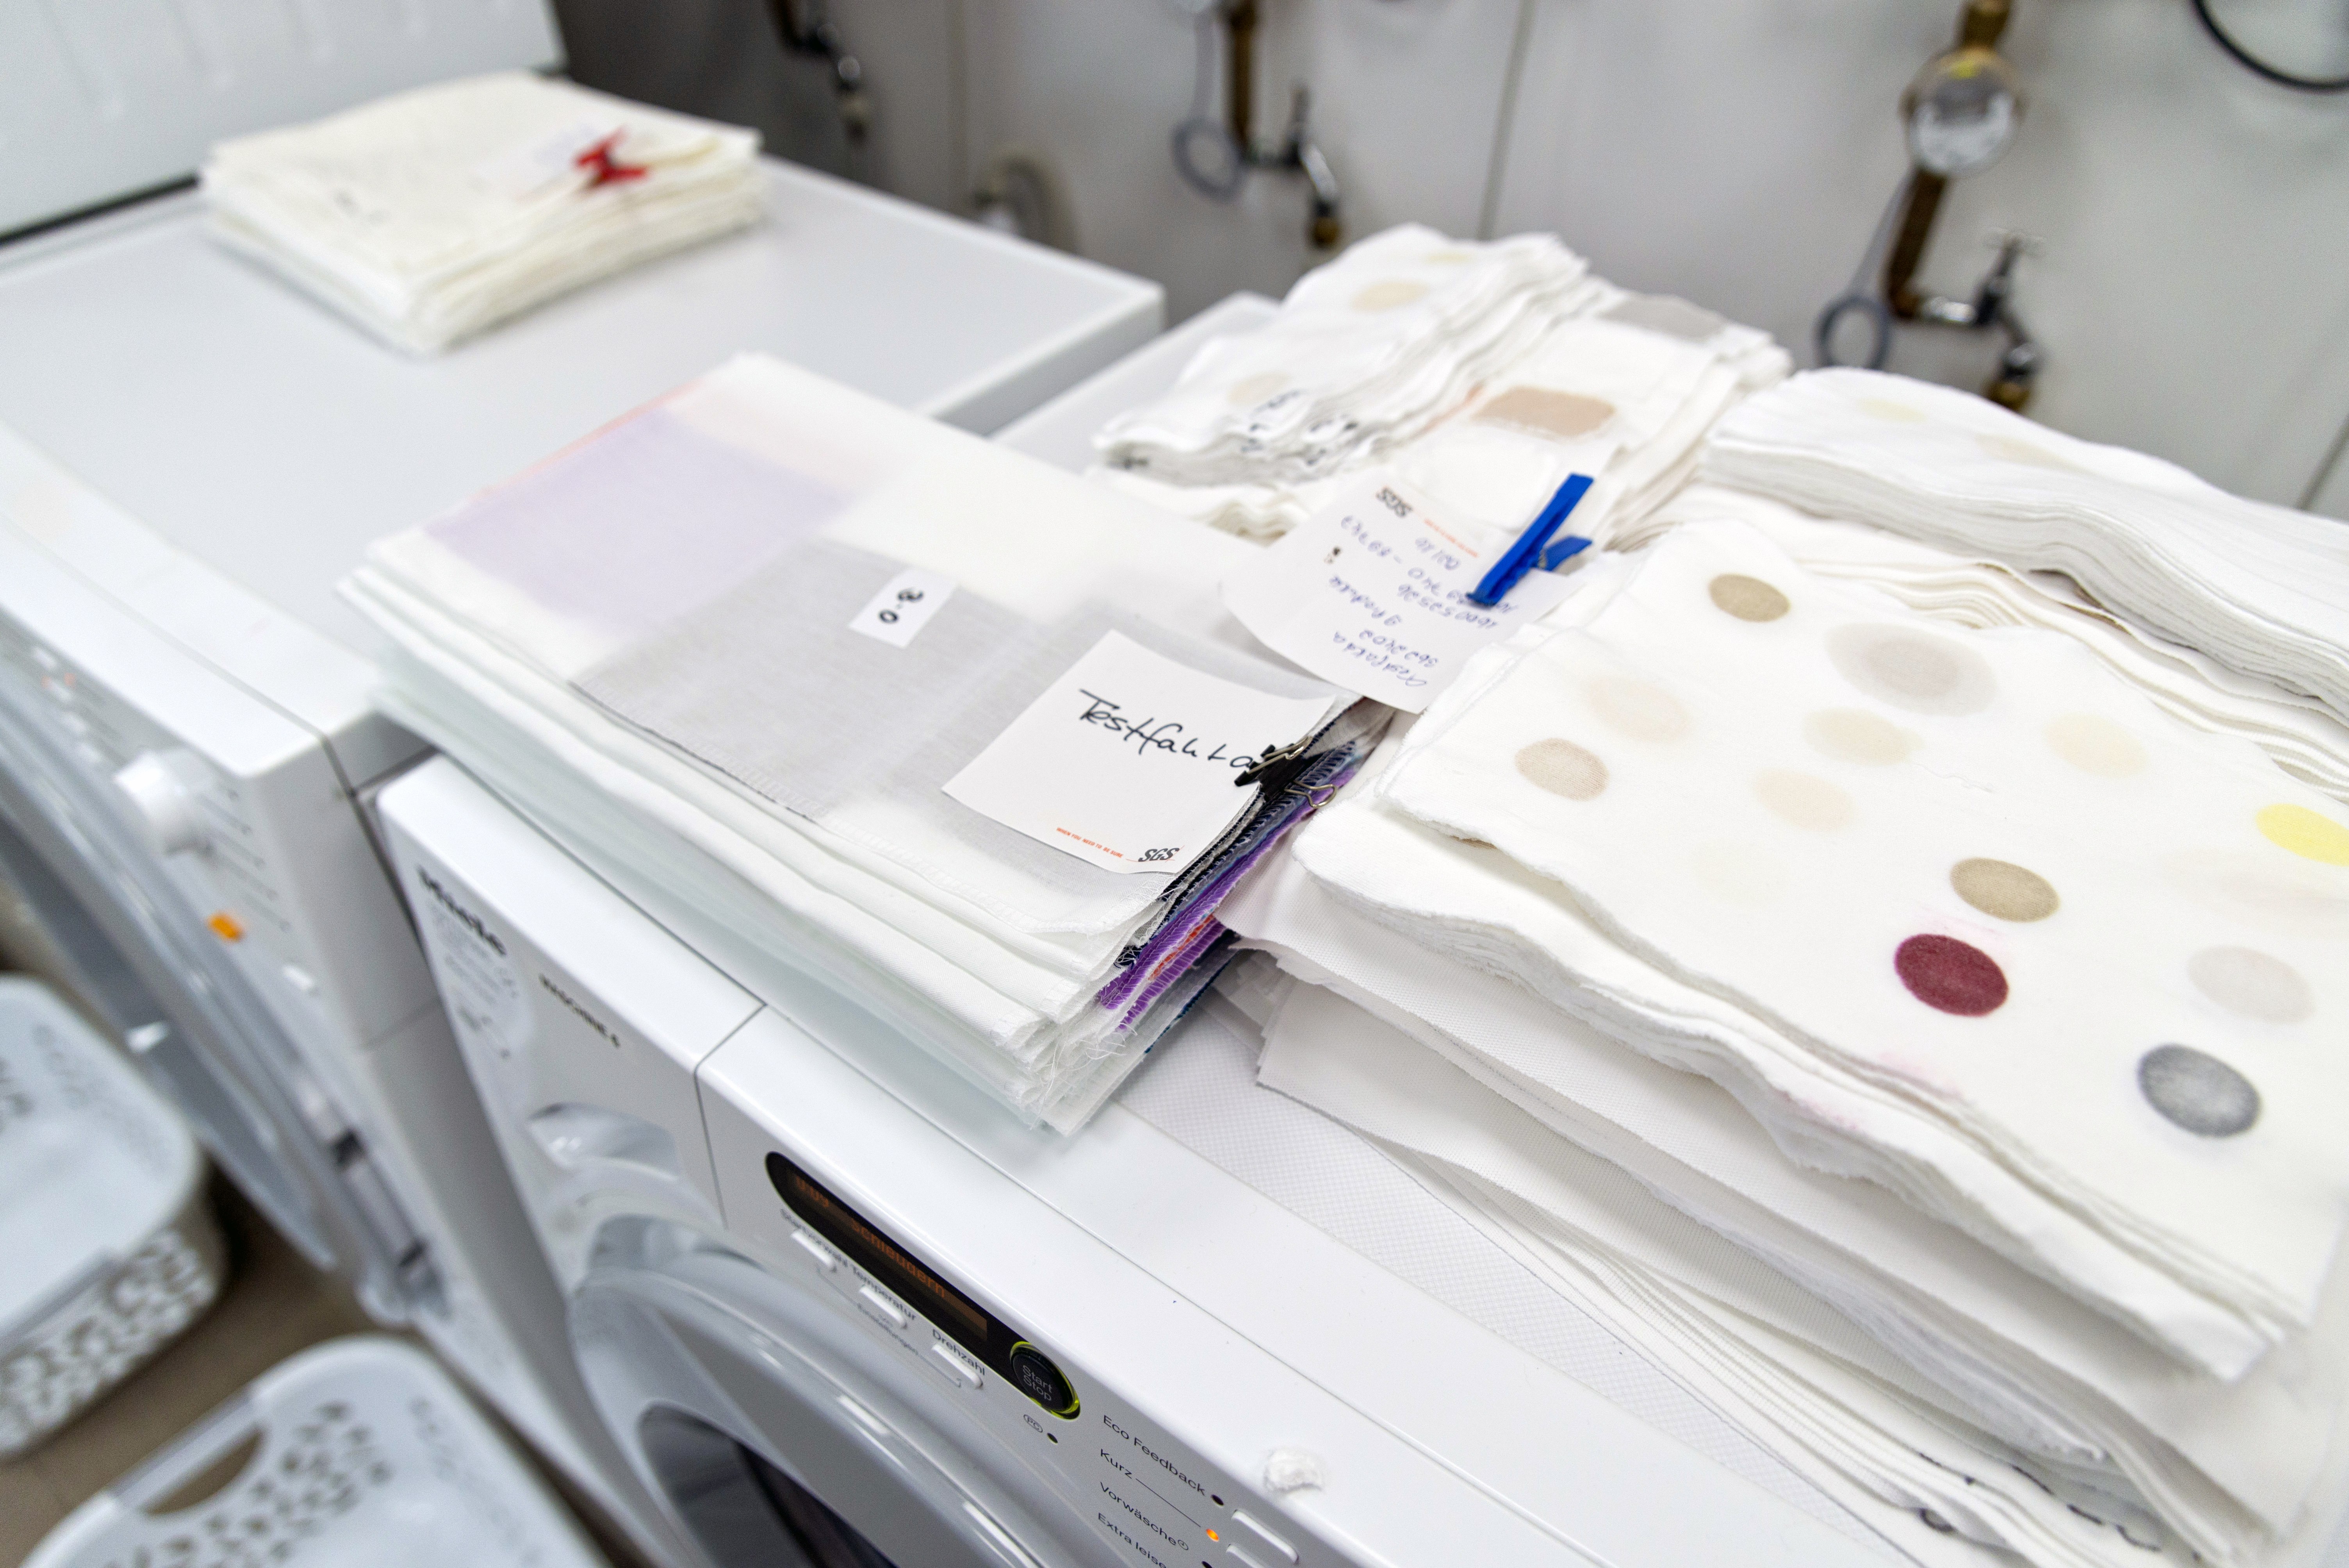 Standardised stains from Warwick Equest on cotton fabric were used in the test. Photo: Tobias Meyer